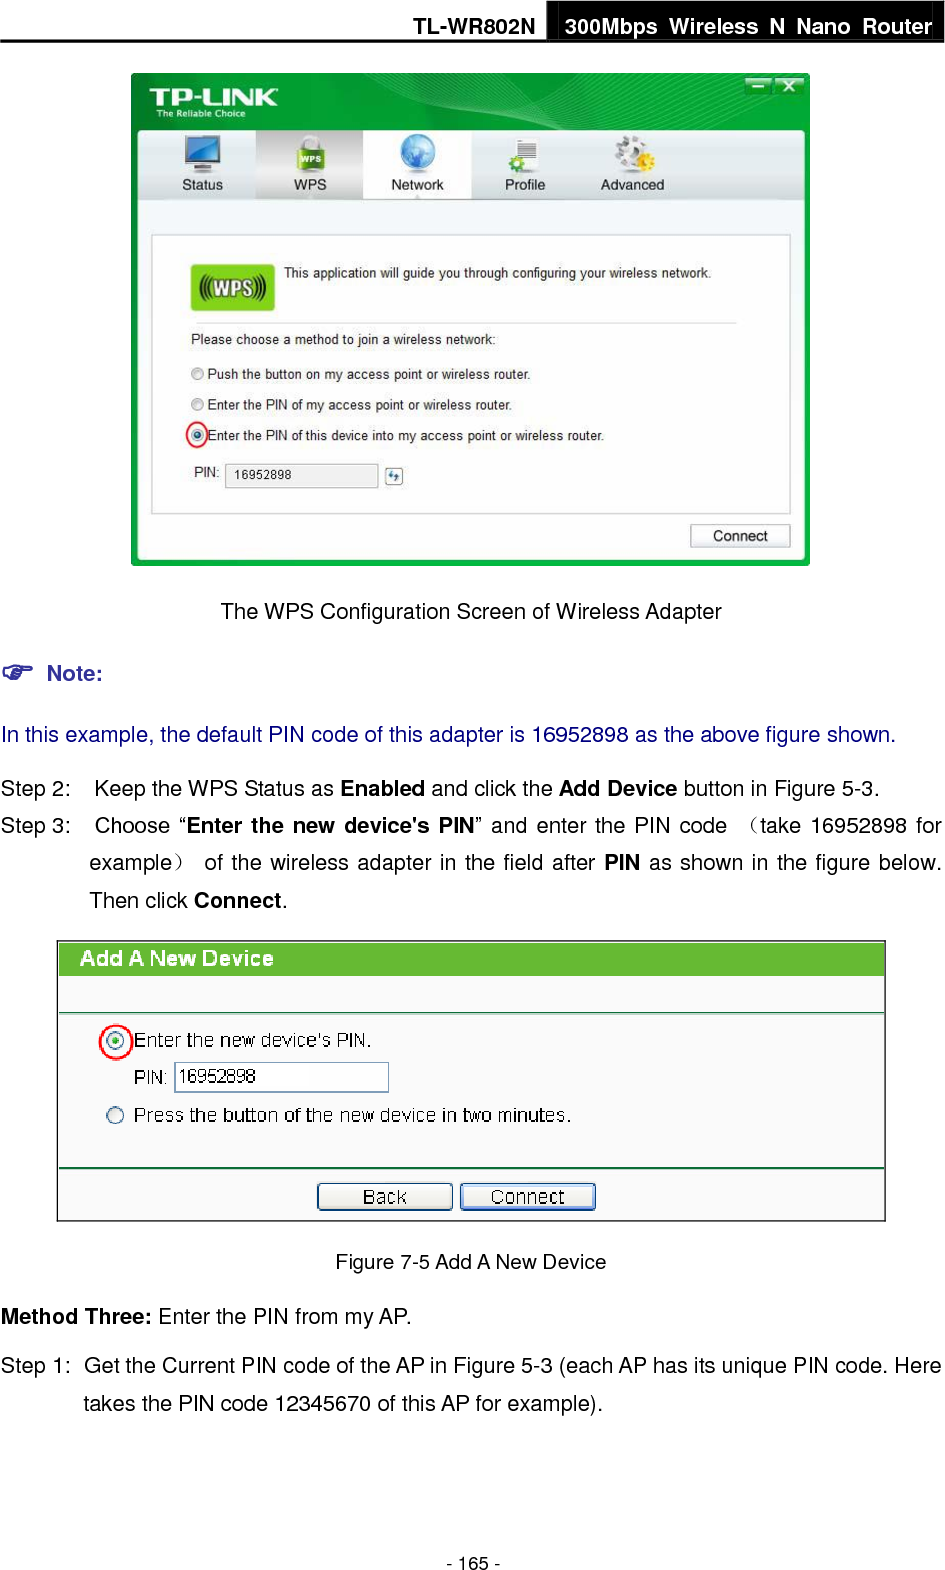 TL-WR802N 300Mbps  Wireless  N  Nano  Router  - 165 -  The WPS Configuration Screen of Wireless Adapter  Note: In this example, the default PIN code of this adapter is 16952898 as the above figure shown. Step 2:  Keep the WPS Status as Enabled and click the Add Device button in Figure 5-3. Step 3:  Choose “Enter the new device&apos;s PIN” and enter the PIN code  （take 16952898 for example）  of the wireless adapter in the field after PIN as shown in the figure below. Then click Connect.  Figure 7-5 Add A New Device Method Three: Enter the PIN from my AP. Step 1:  Get the Current PIN code of the AP in Figure 5-3 (each AP has its unique PIN code. Here takes the PIN code 12345670 of this AP for example). 